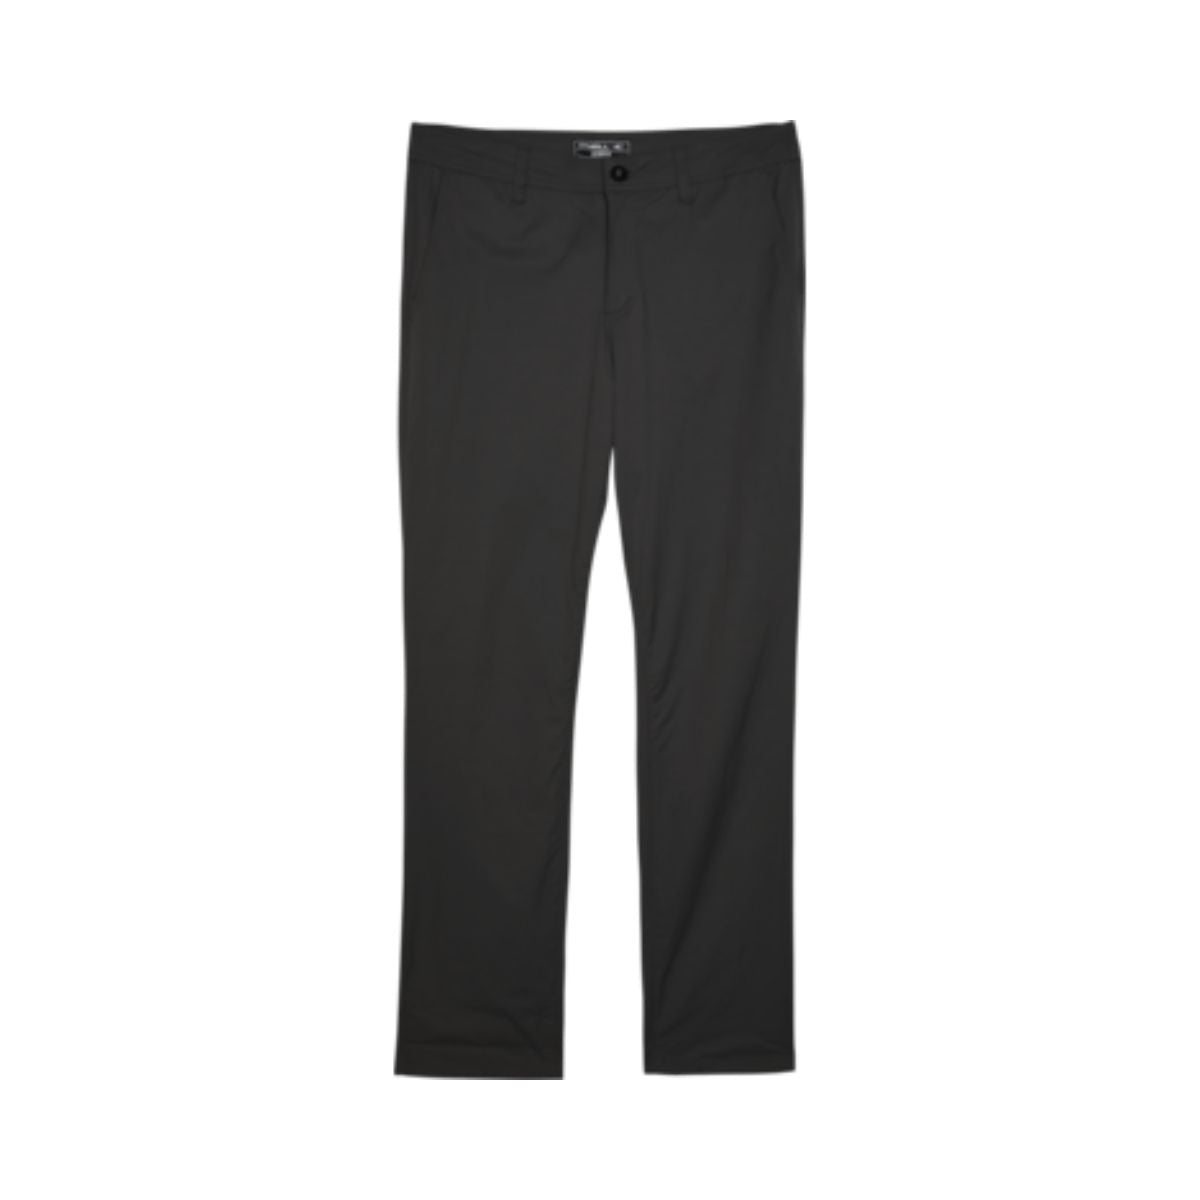 O'Neill Mission Hybrid Chino Pant in Black - BoardCo